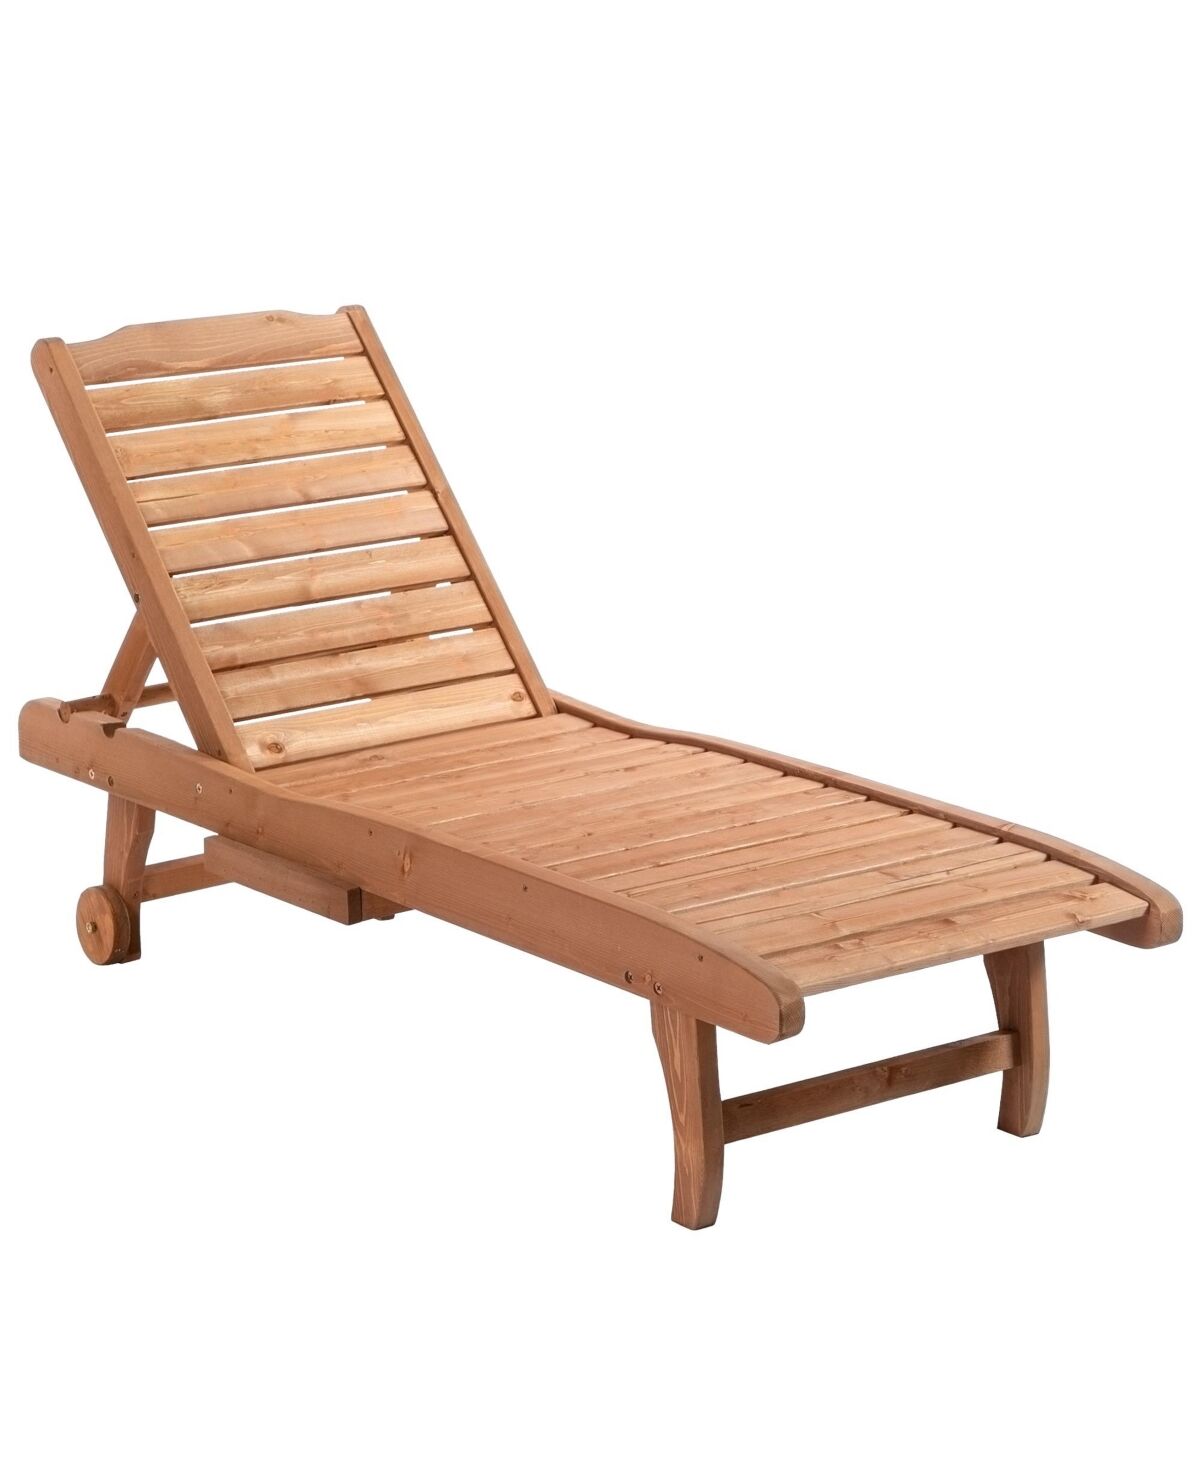 Outsunny Outdoor Sun Lounger, Wooden Chaise Lounge Chair with 3-Position Backrest, Pull-Out Tray & Wheels, for Beach, Poolside and Patio - Brown red